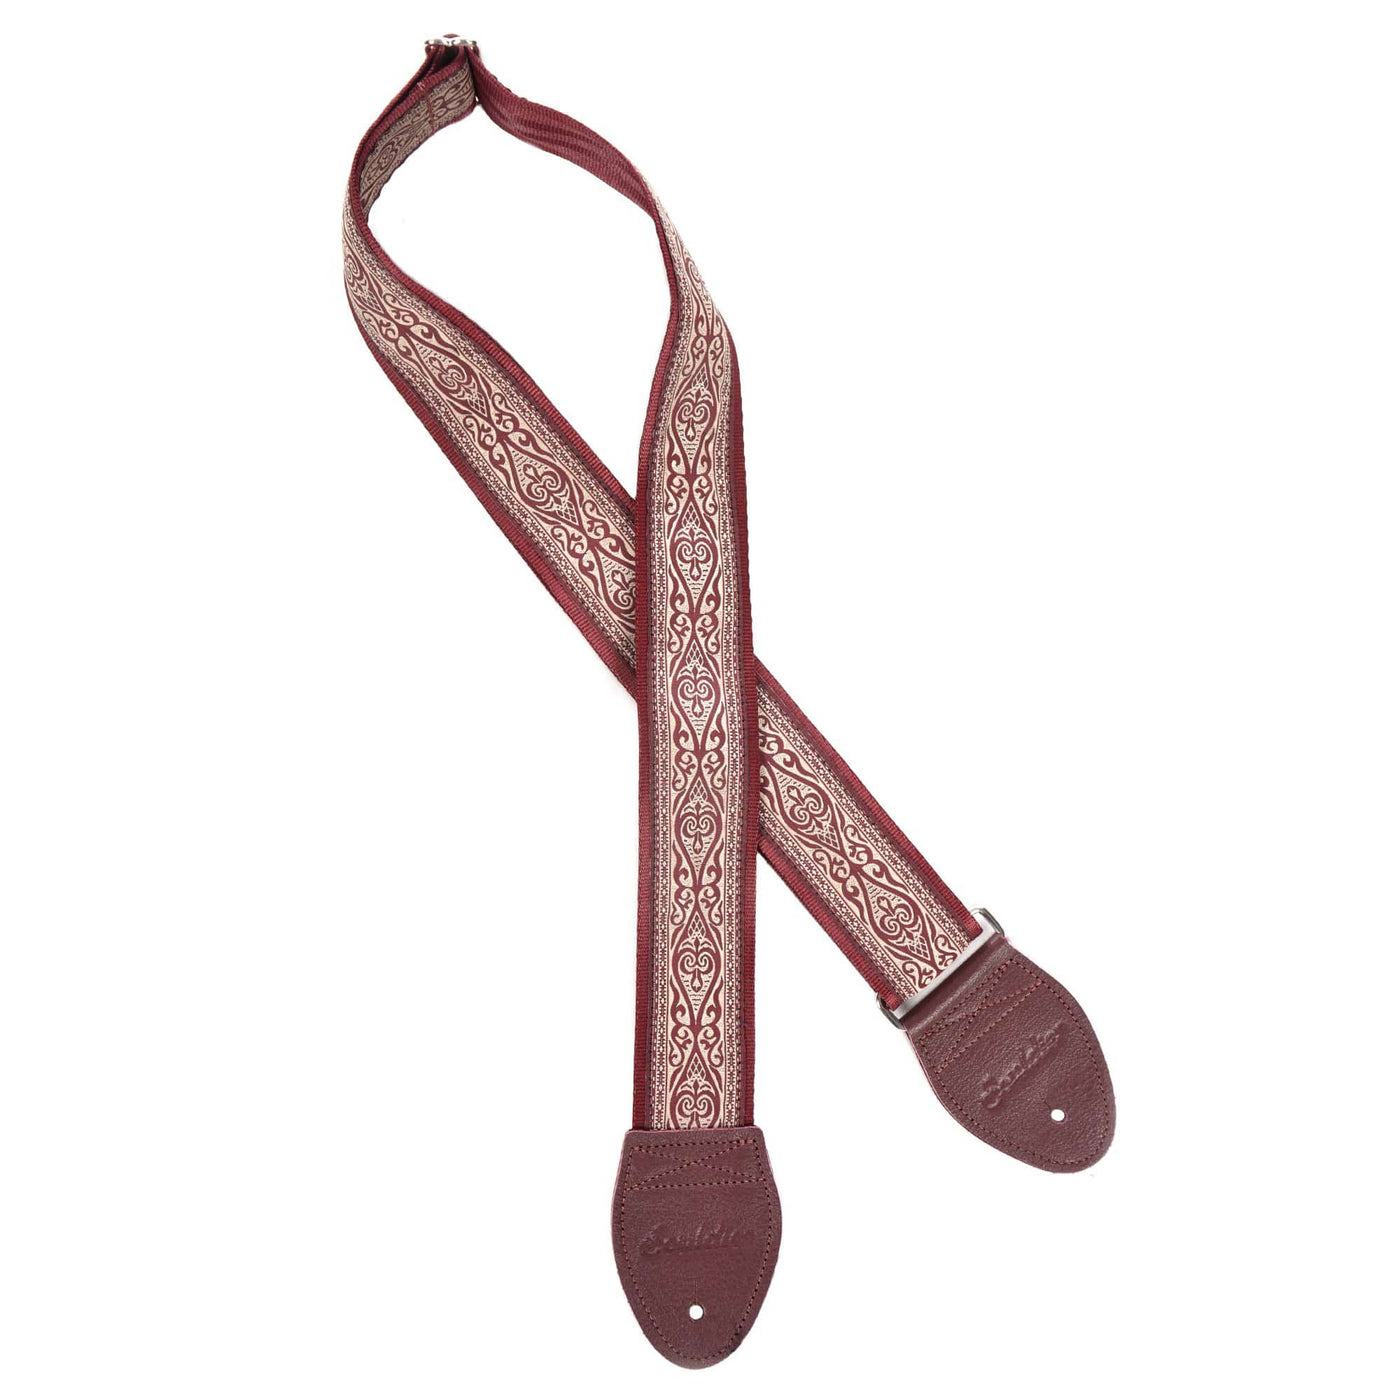 Souldier GS0871BD04BD - Handmade Seatbelt Guitar Strap for Bass, Electric or Acoustic Guitar, 2 Inches Wide and Adjustable Length from 30" to 63"  Made in the USA, Ellingon, Burgundy